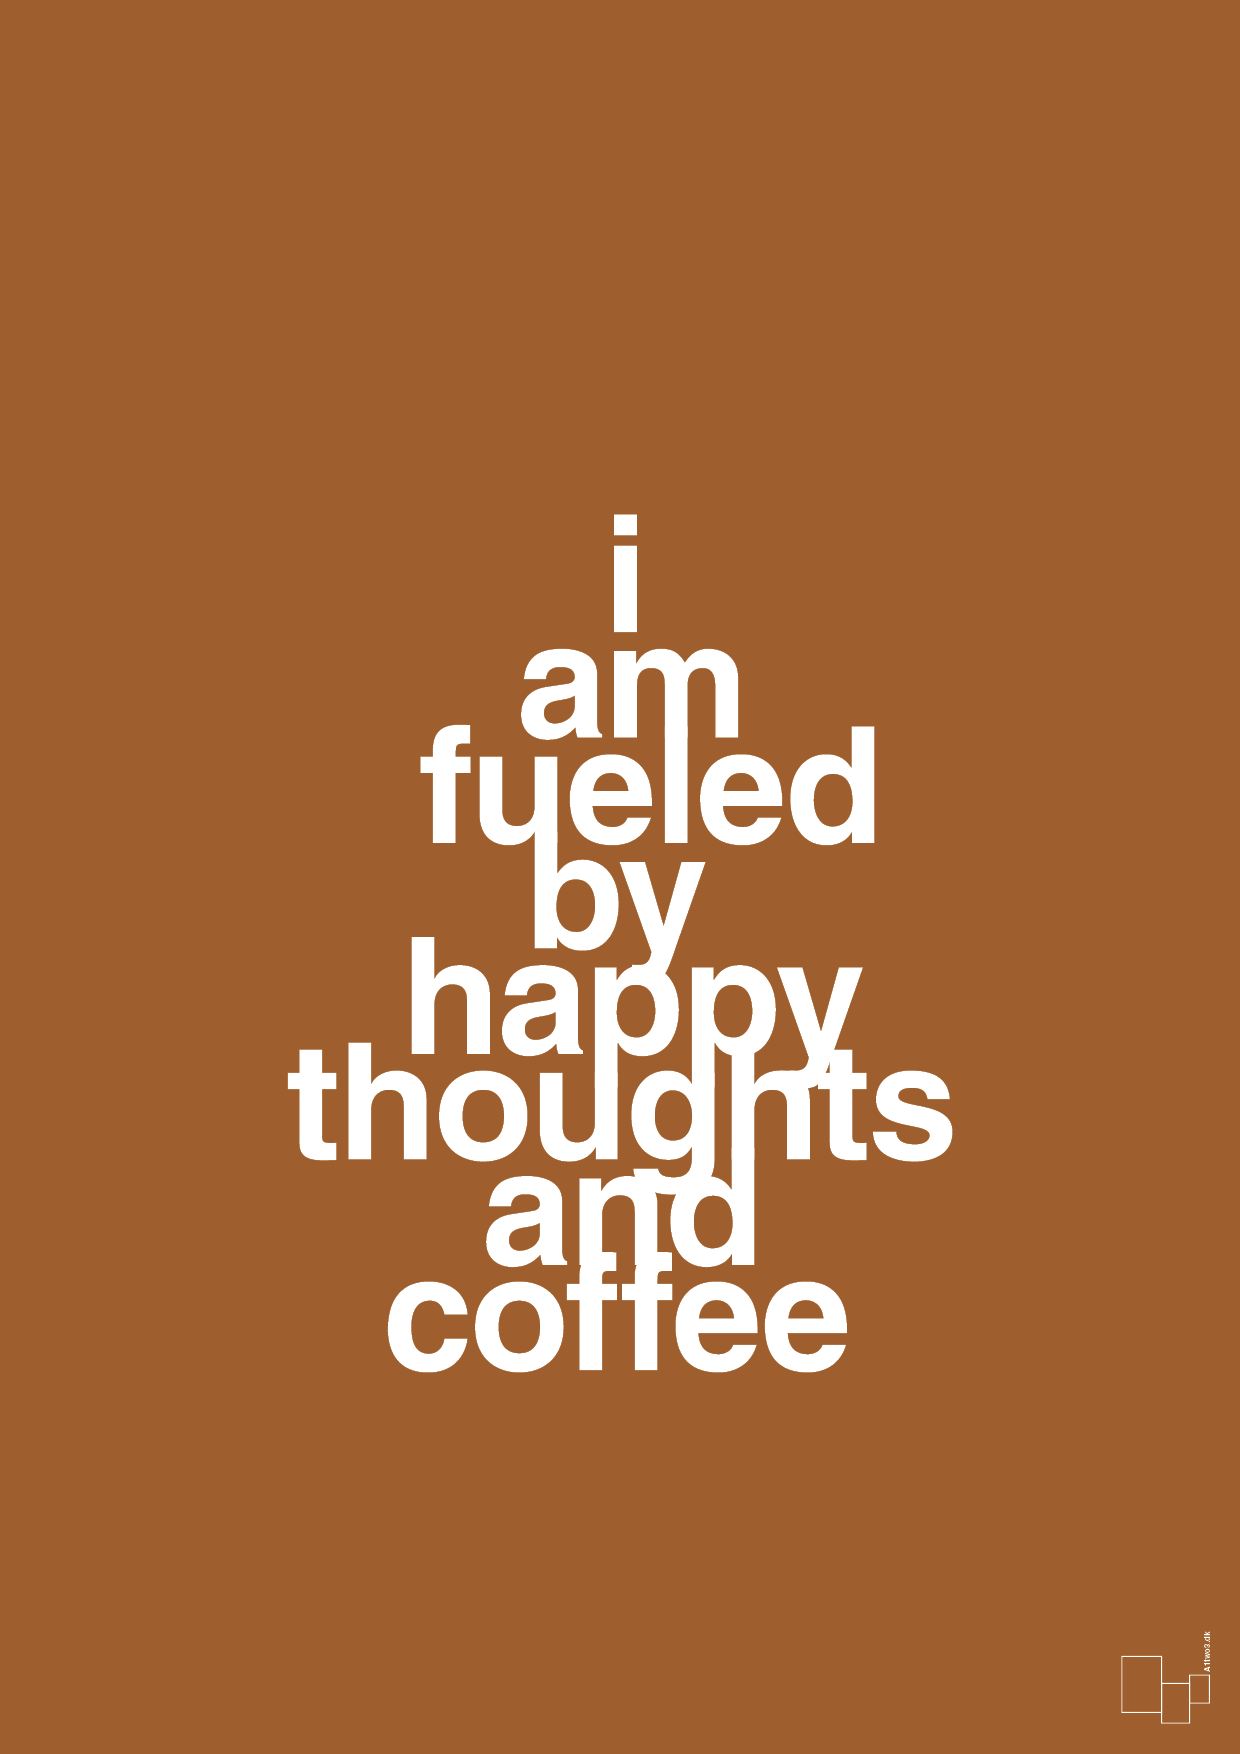 i am fueled by happy thoughts and coffee - Plakat med Mad & Drikke i Cognac